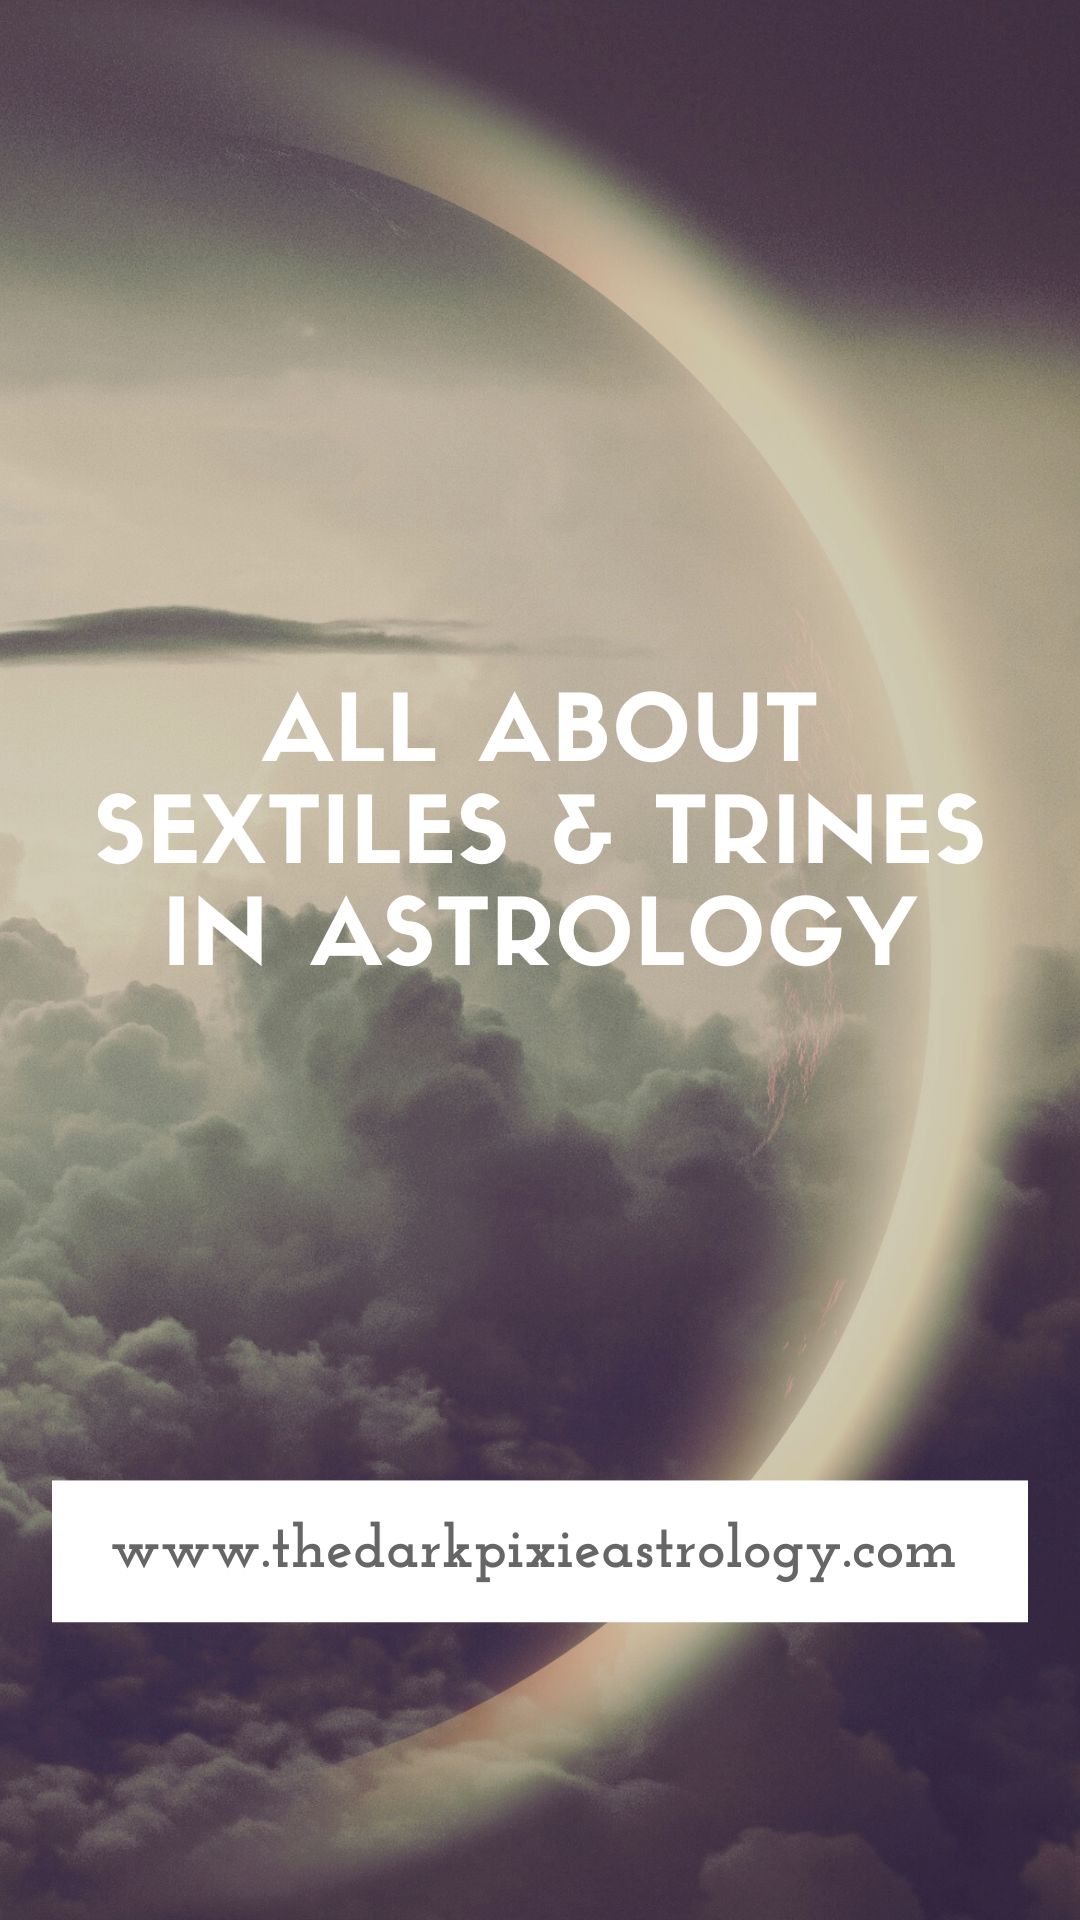 All About Sextiles & Trines in Astrology - The Dark Pixie Astrology